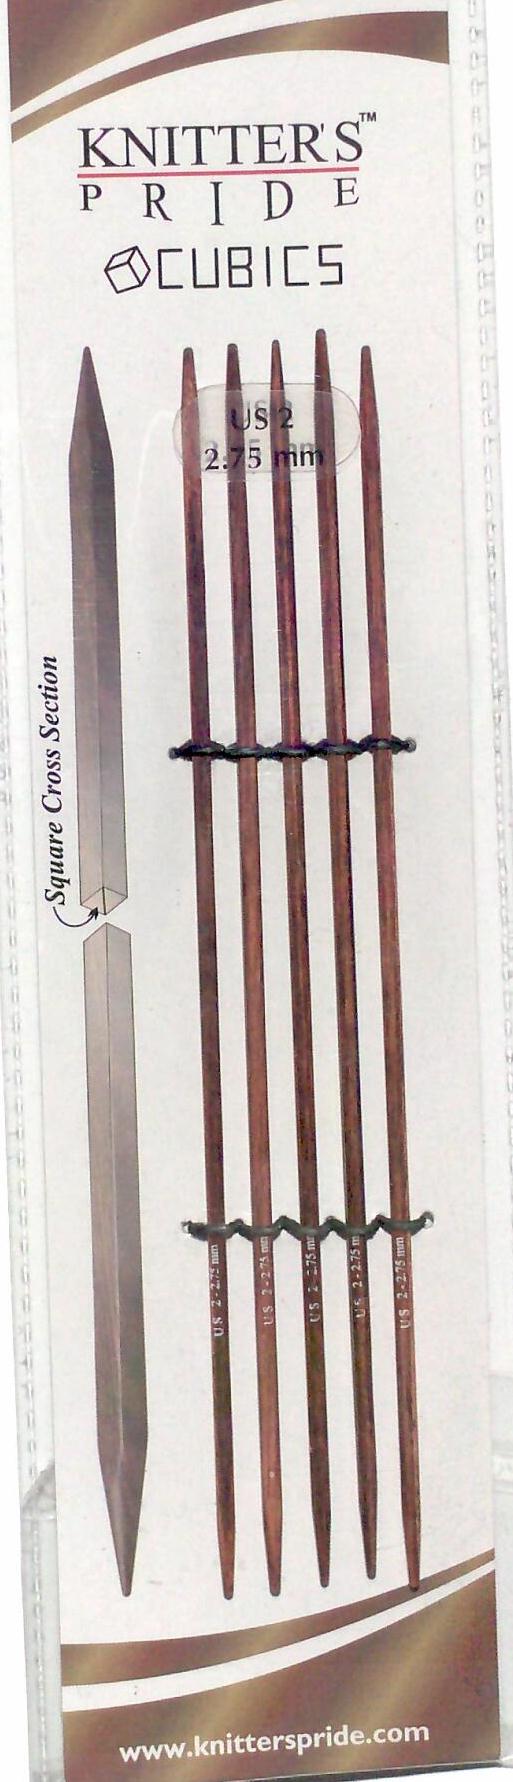 Knitter's Pride 06"/15 cm 2.50 mm/US 1.5 Rosewood Cubics Double Point Needles